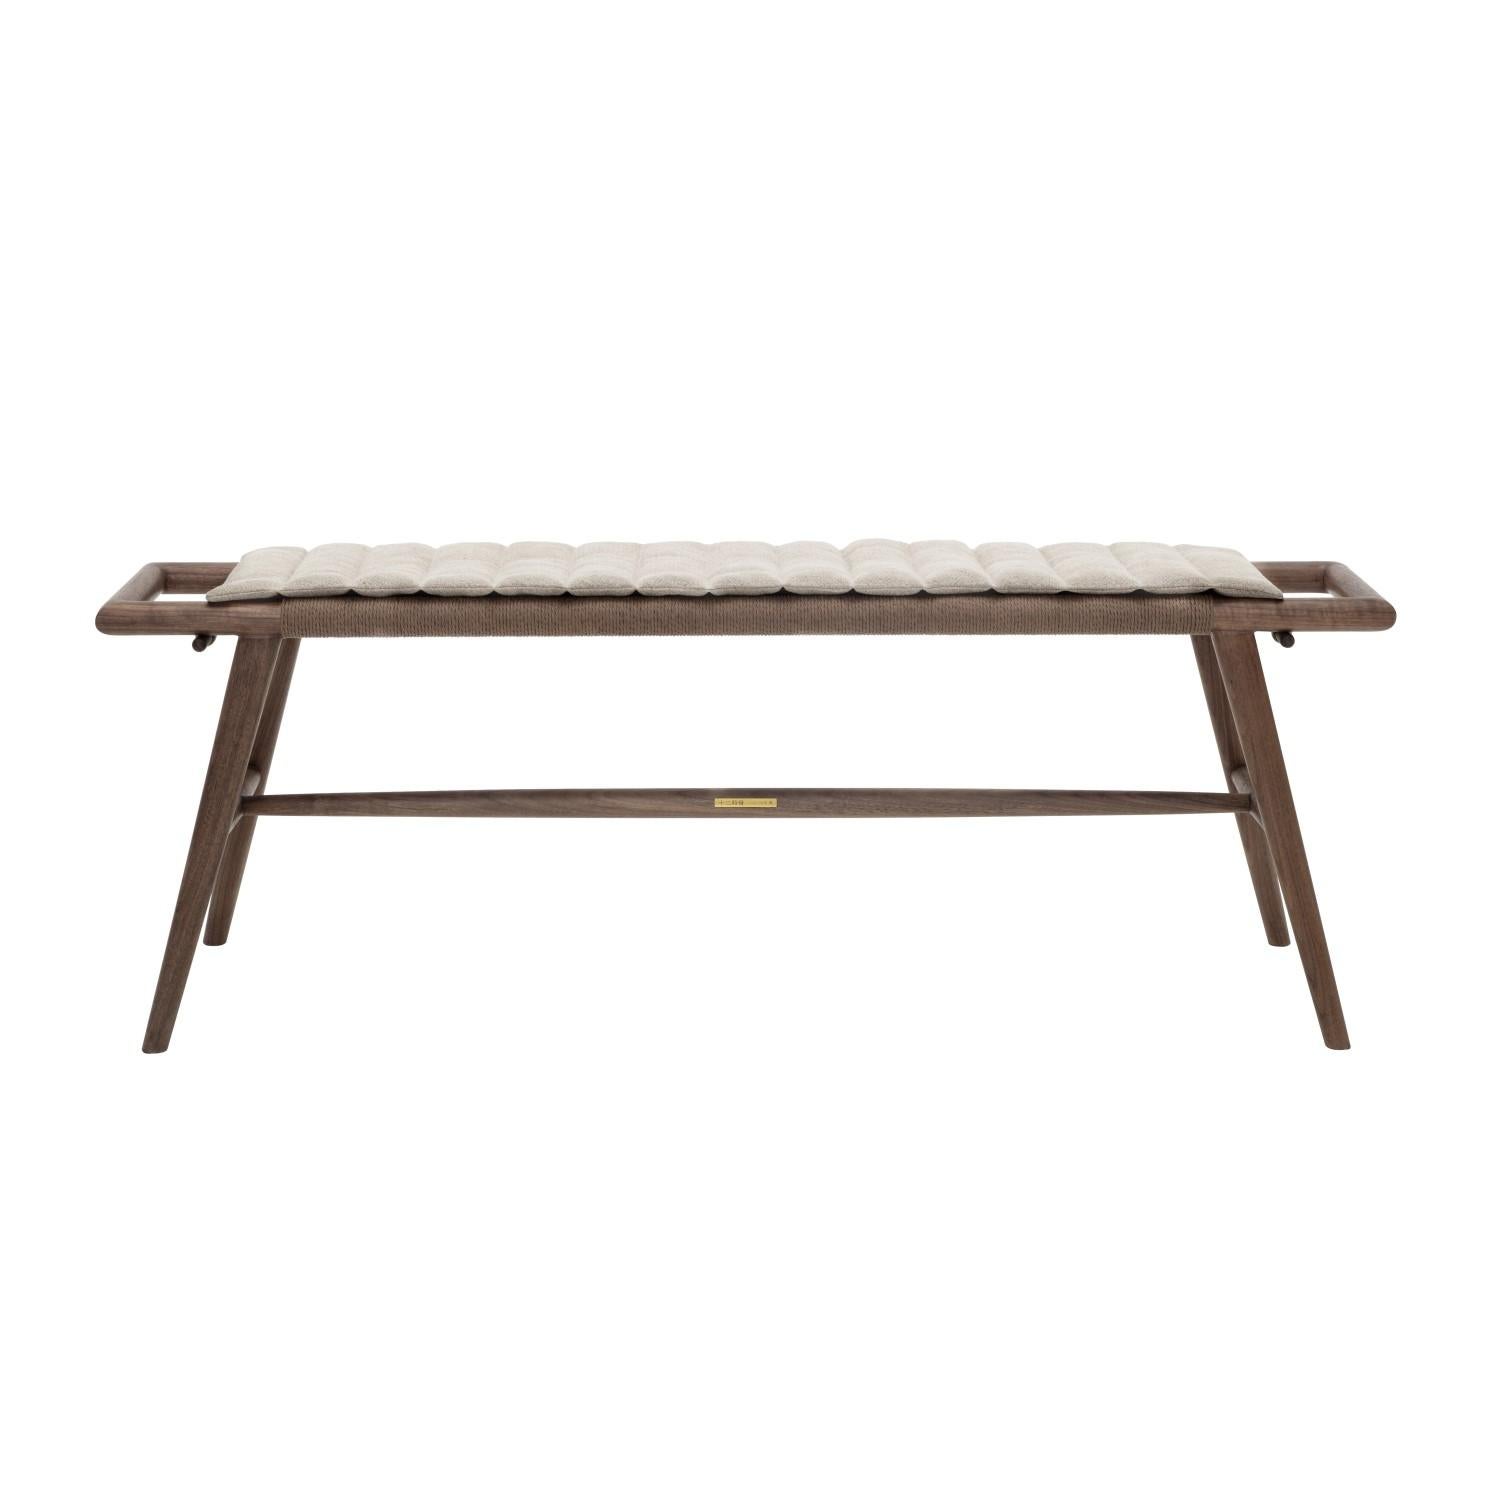 The artfully designed Woven Bench combines form, function, and delicate craftsmanship. Its frame is made using mortise and tenon joinery, ensuring durability and longevity for years to come. The bench gets its name from its braided rope seating,